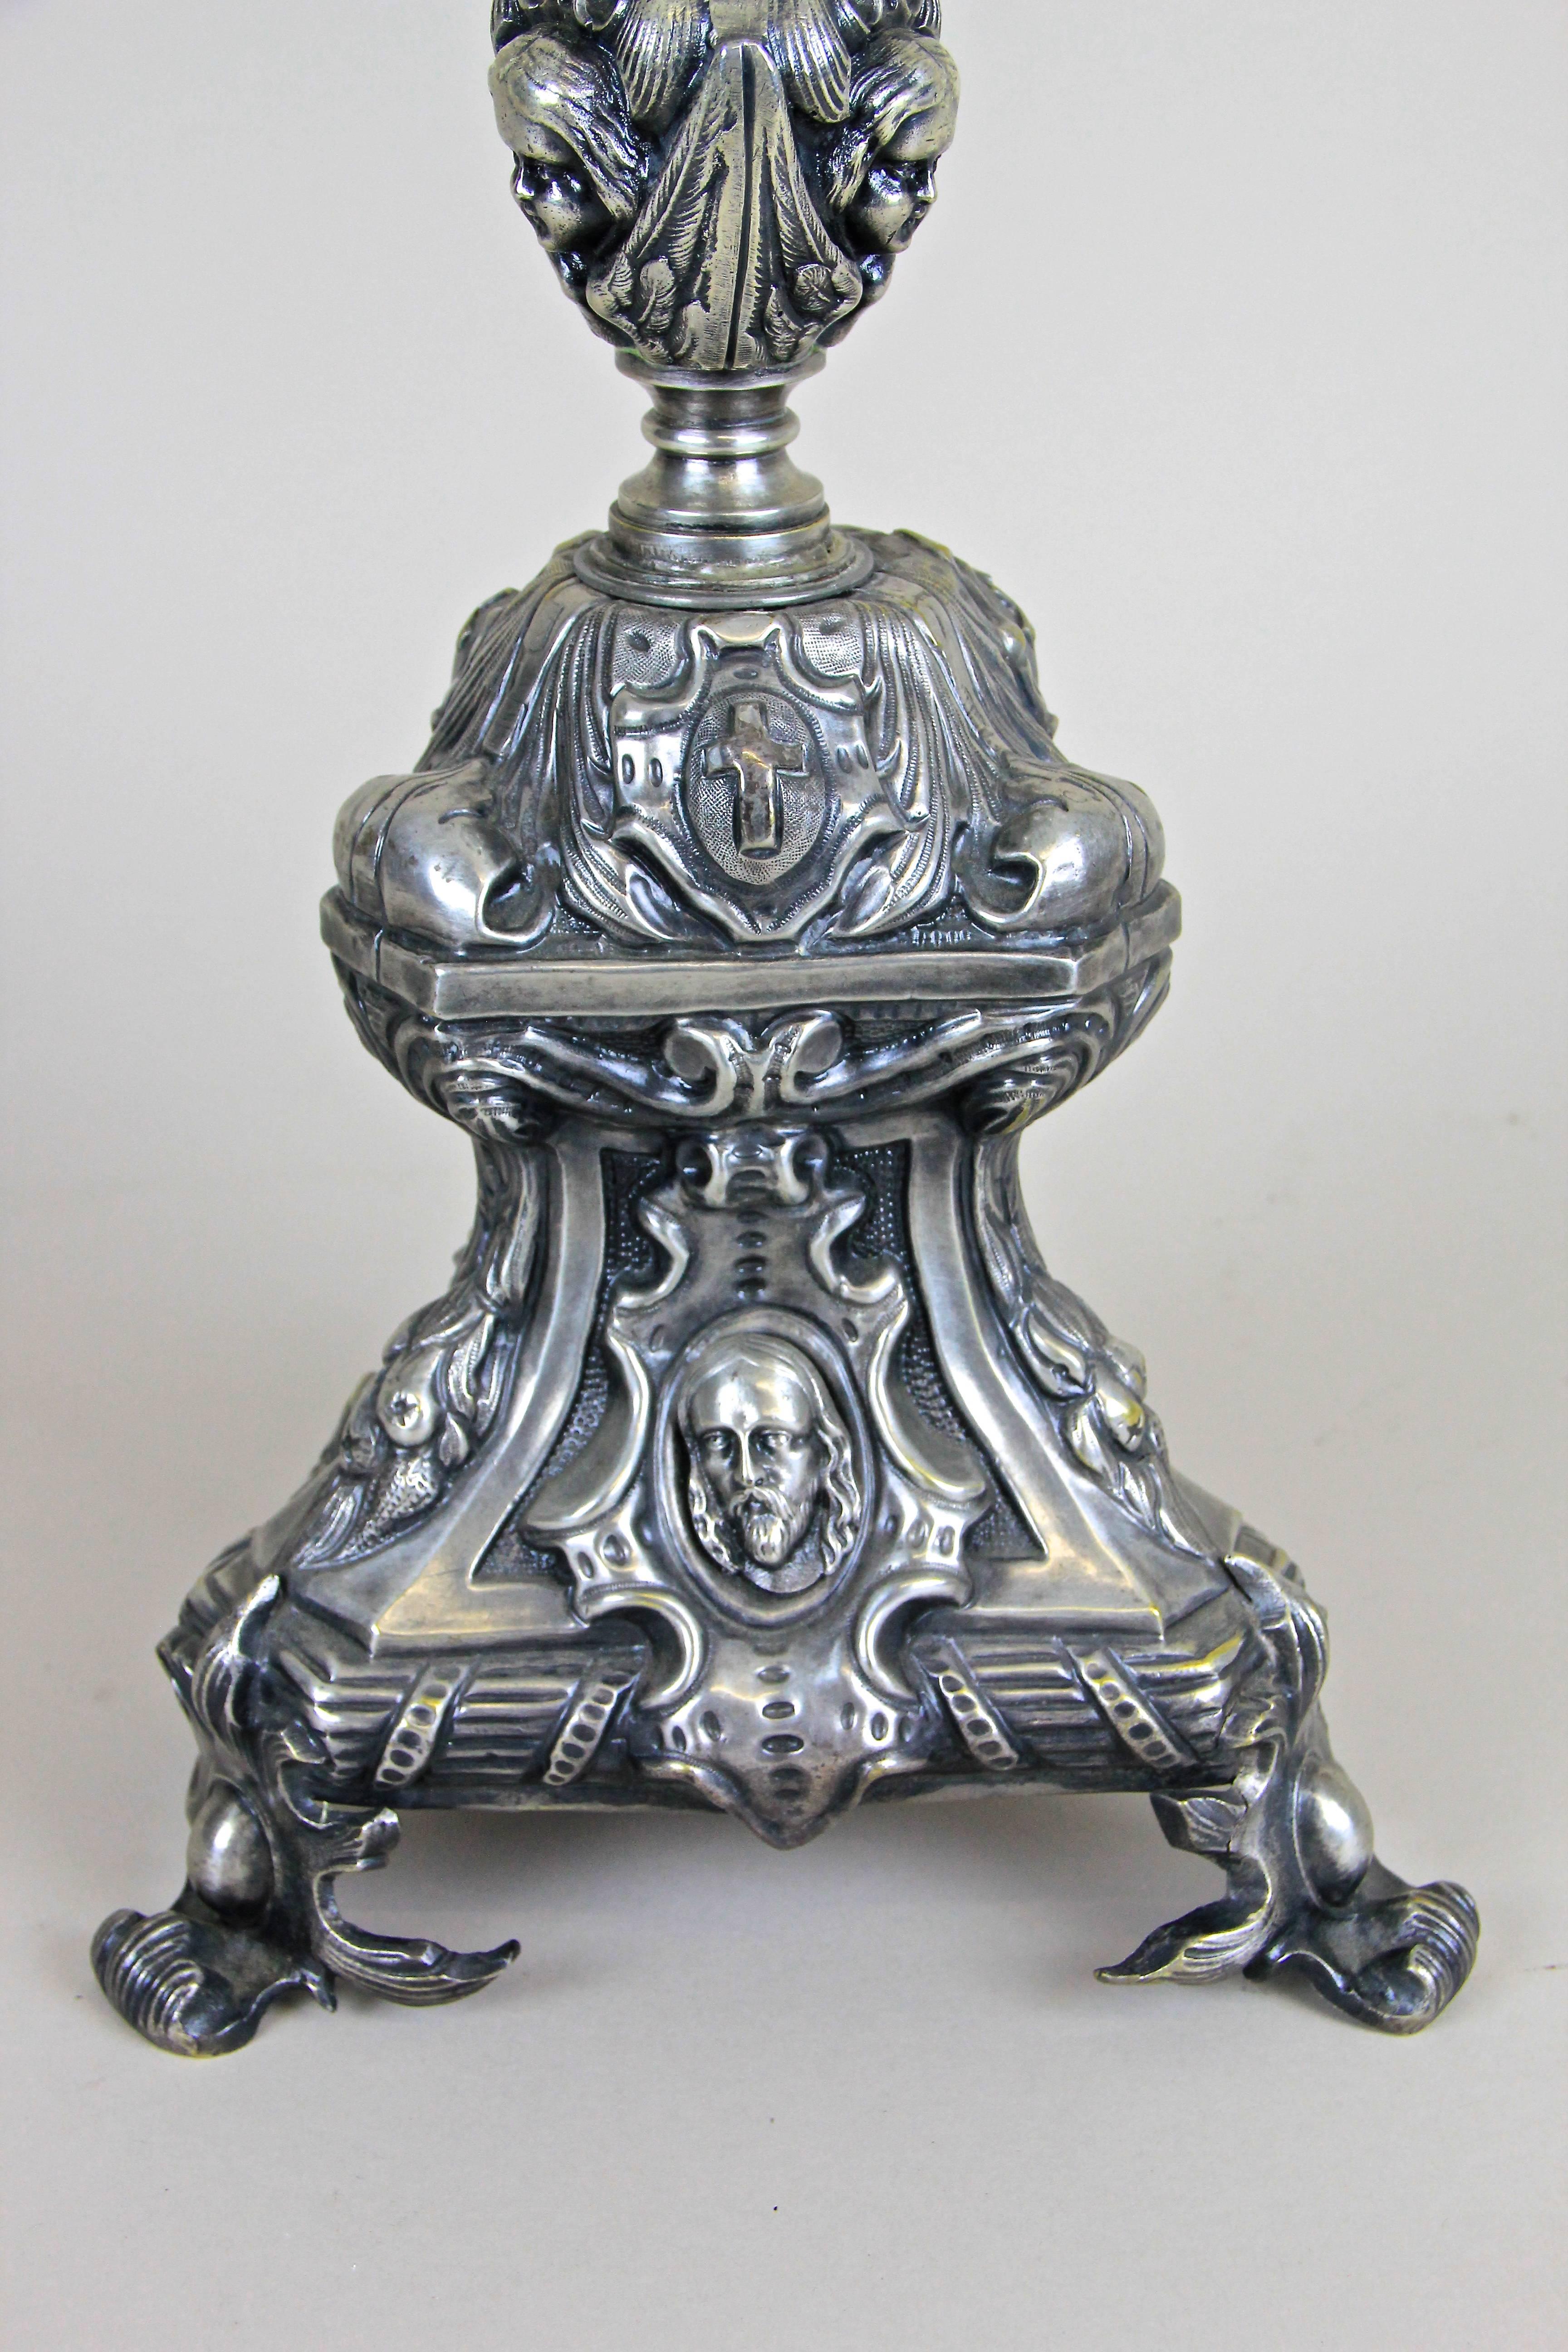 Made of brass with high attention to details, this tall silvered candleholder originated from Austria around the Mid19th century, circa 1850. On each side the main focus lies on three different faces (pictures 2-4) but just take a detailed look on